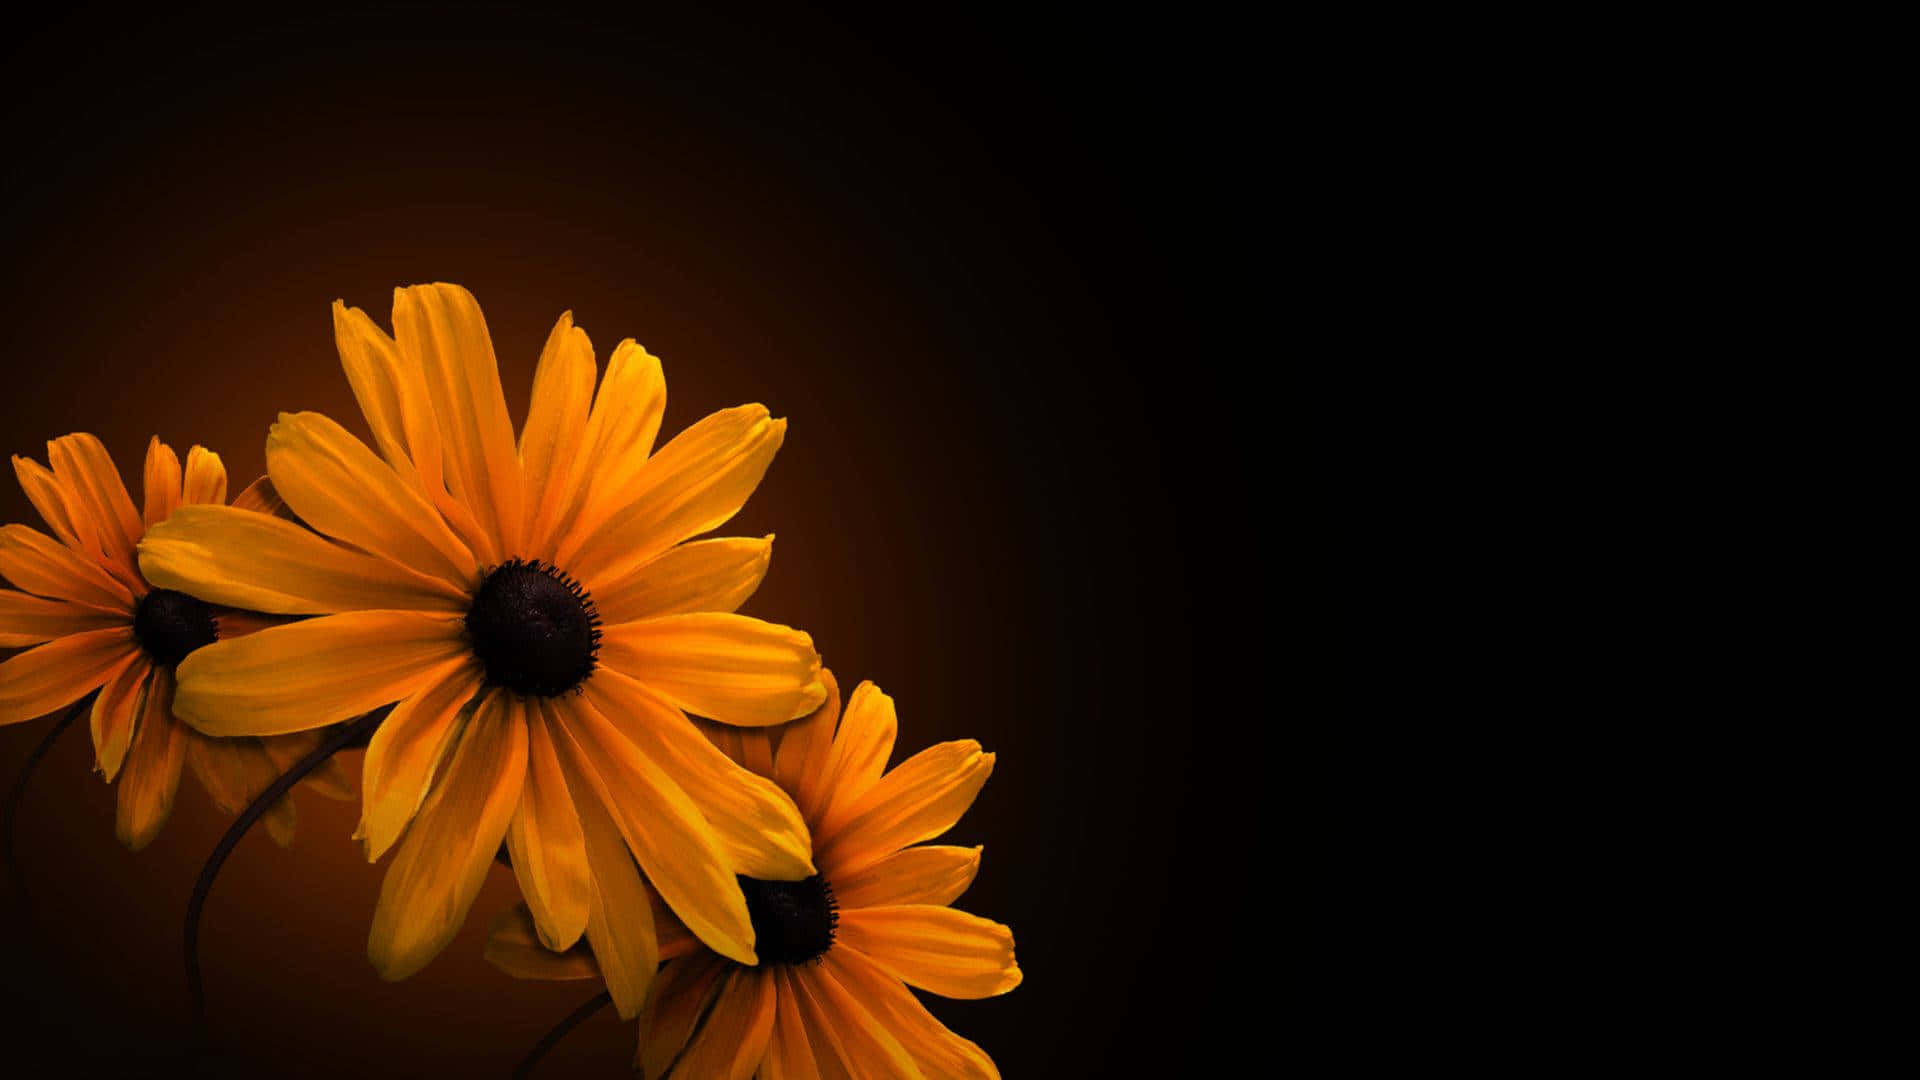 A Black Background With Yellow Flowers On It Wallpaper